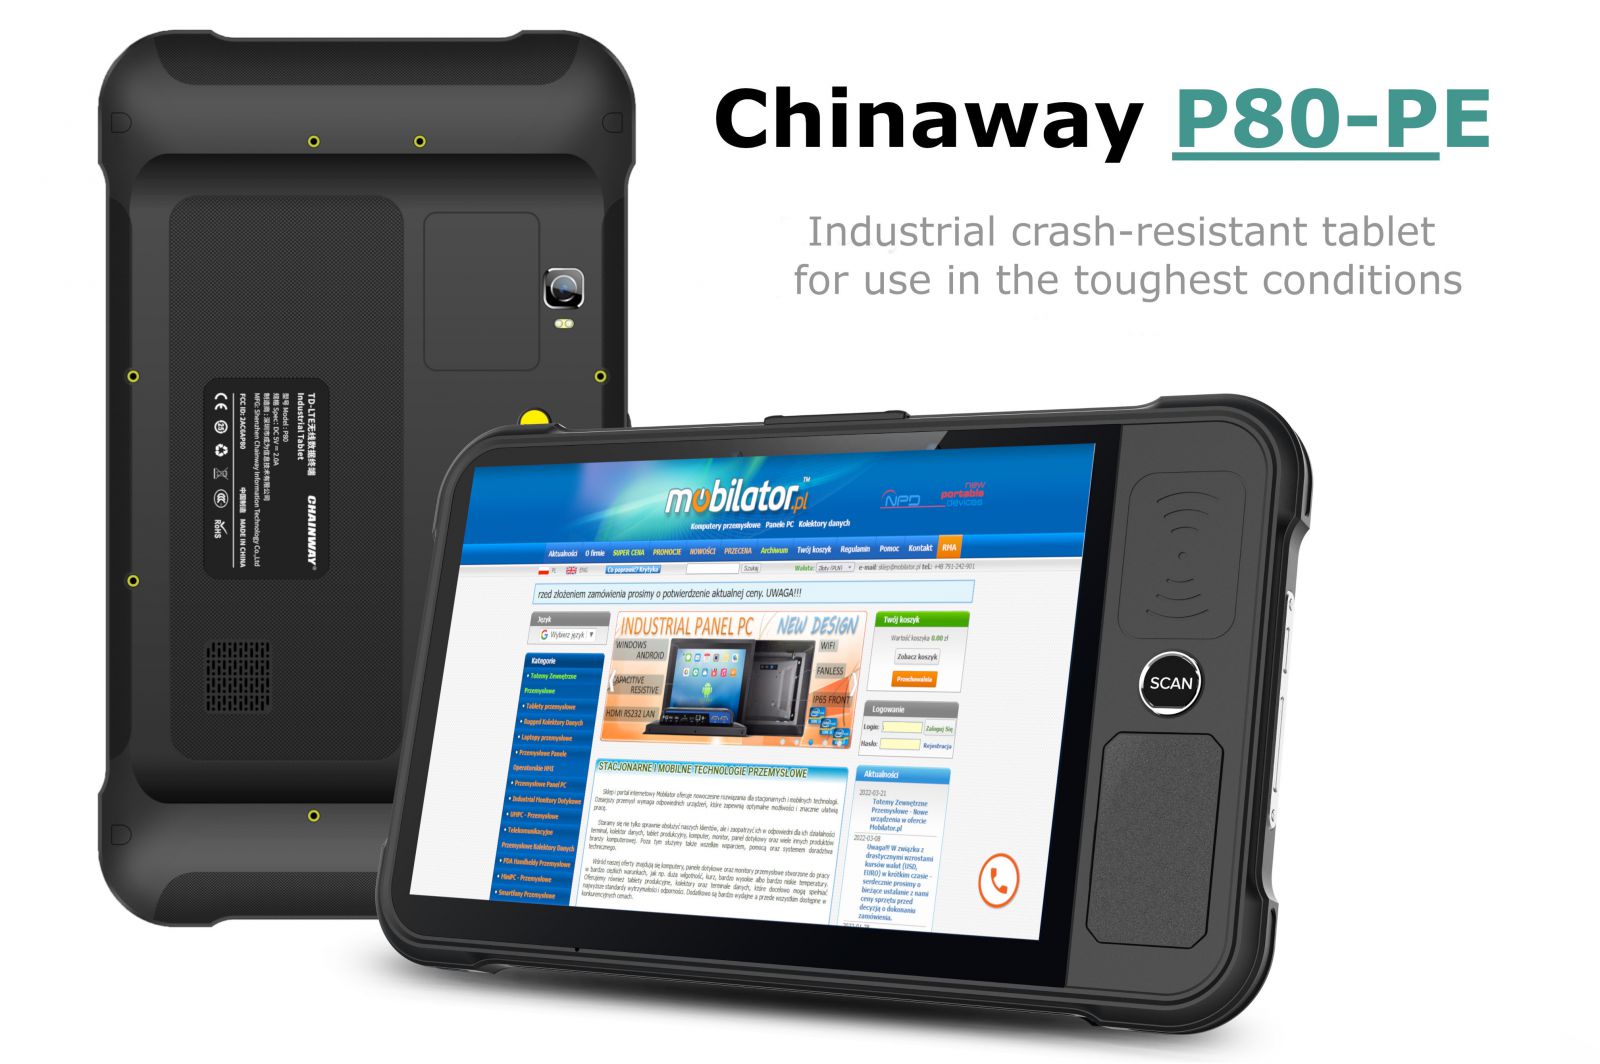 Chainway P80-PE v. 9 – 8-inch industrial tray with 1D and 2D zebra code reader, two PSAM inputs and UHF REID inputs